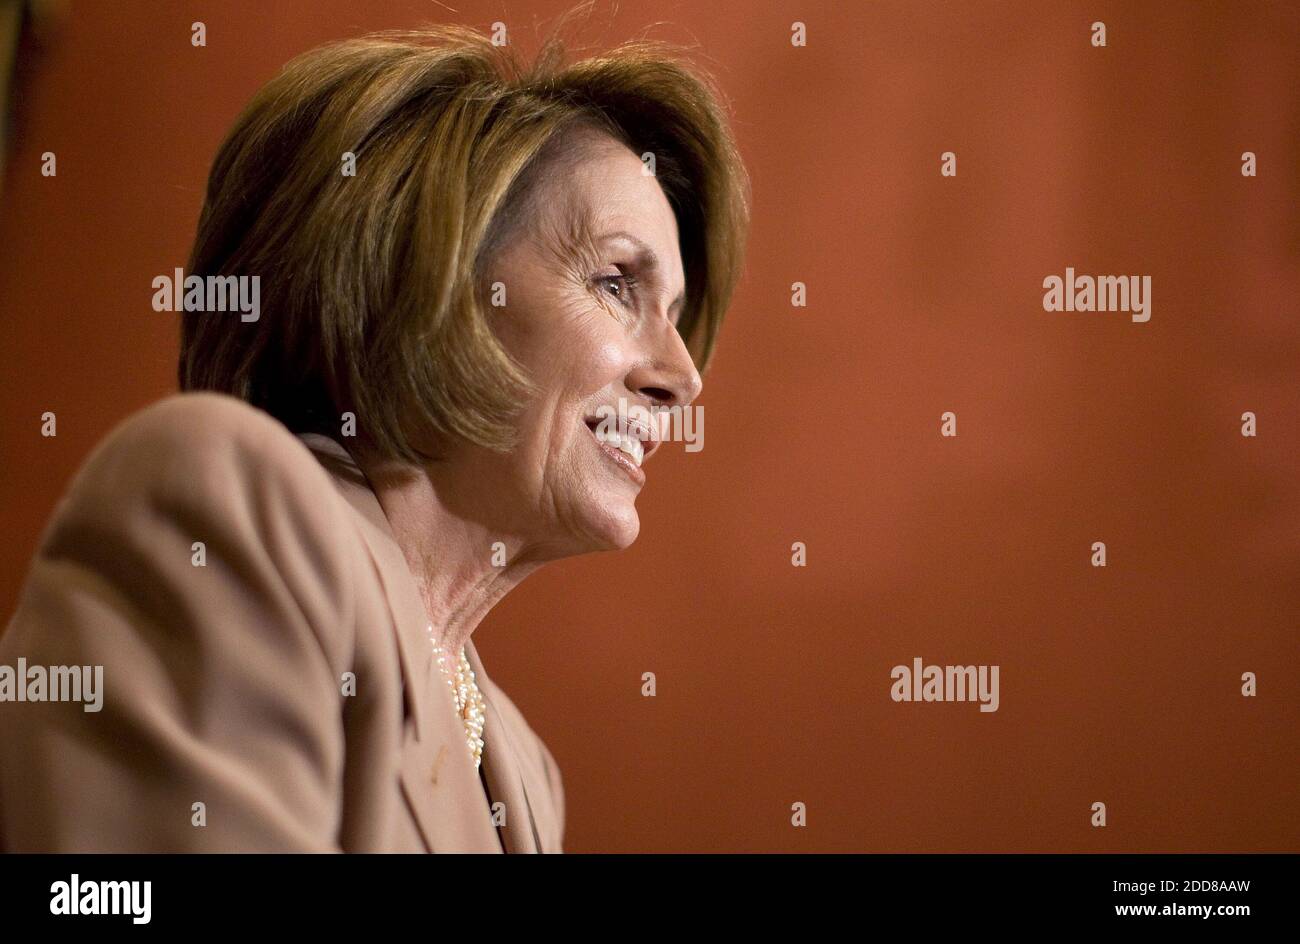 NO FILM, NO VIDEO, NO TV, NO DOCUMENTARY - House Speaker Nancy Pelosi (D-CA) speaks at a news conference on Capitol Hill in Washington, DC, USA on October 2, 2008, to talk about progress on a bailout package for the American economy. Photo by Chuck Kennedy/MCT/ABACAPRESS.COM Stock Photo